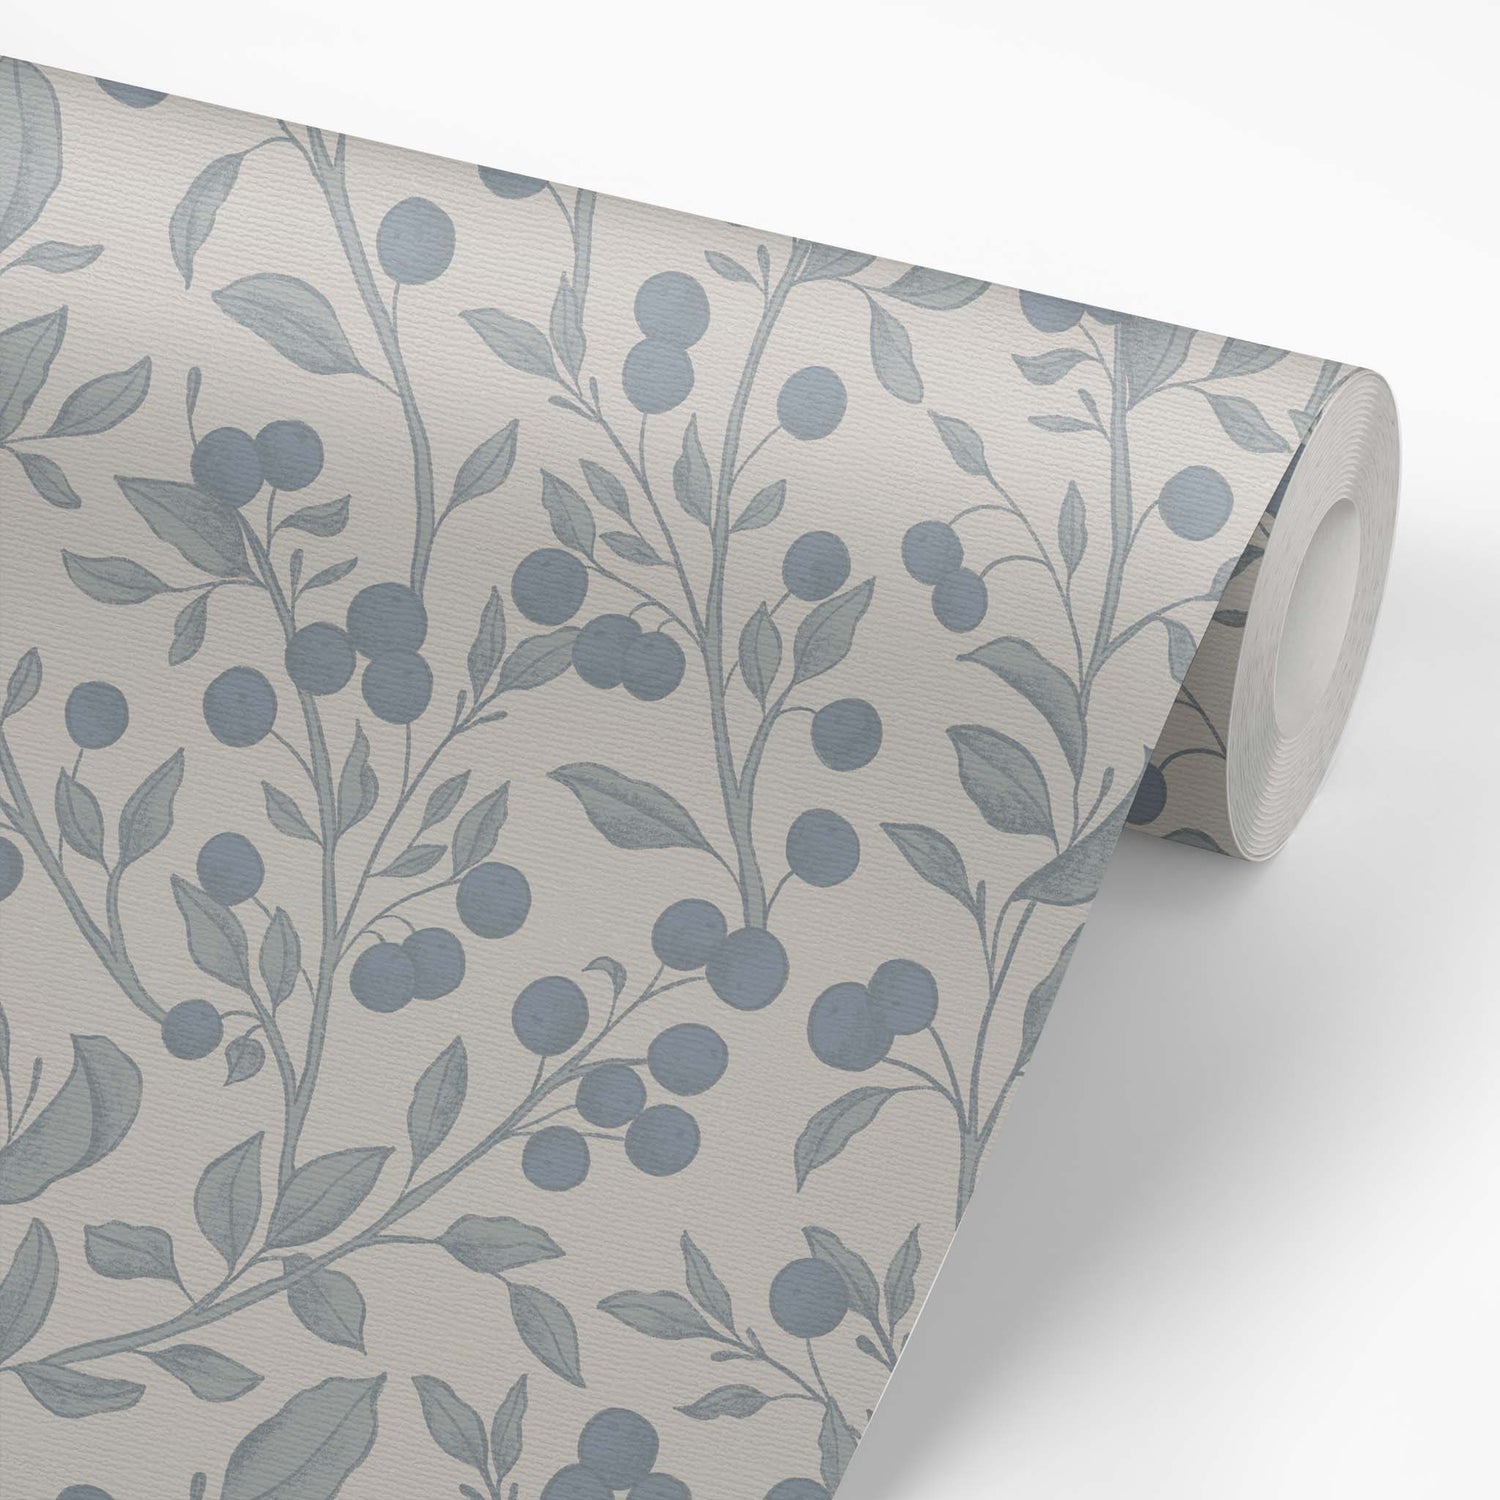 This wallpaper roll of our Berries Wallpaper in Gray and Blue shows our peel and stick, removable wallpaper with hand-drawn sketched berries in gray and blue by artist Mariah Cottrell.